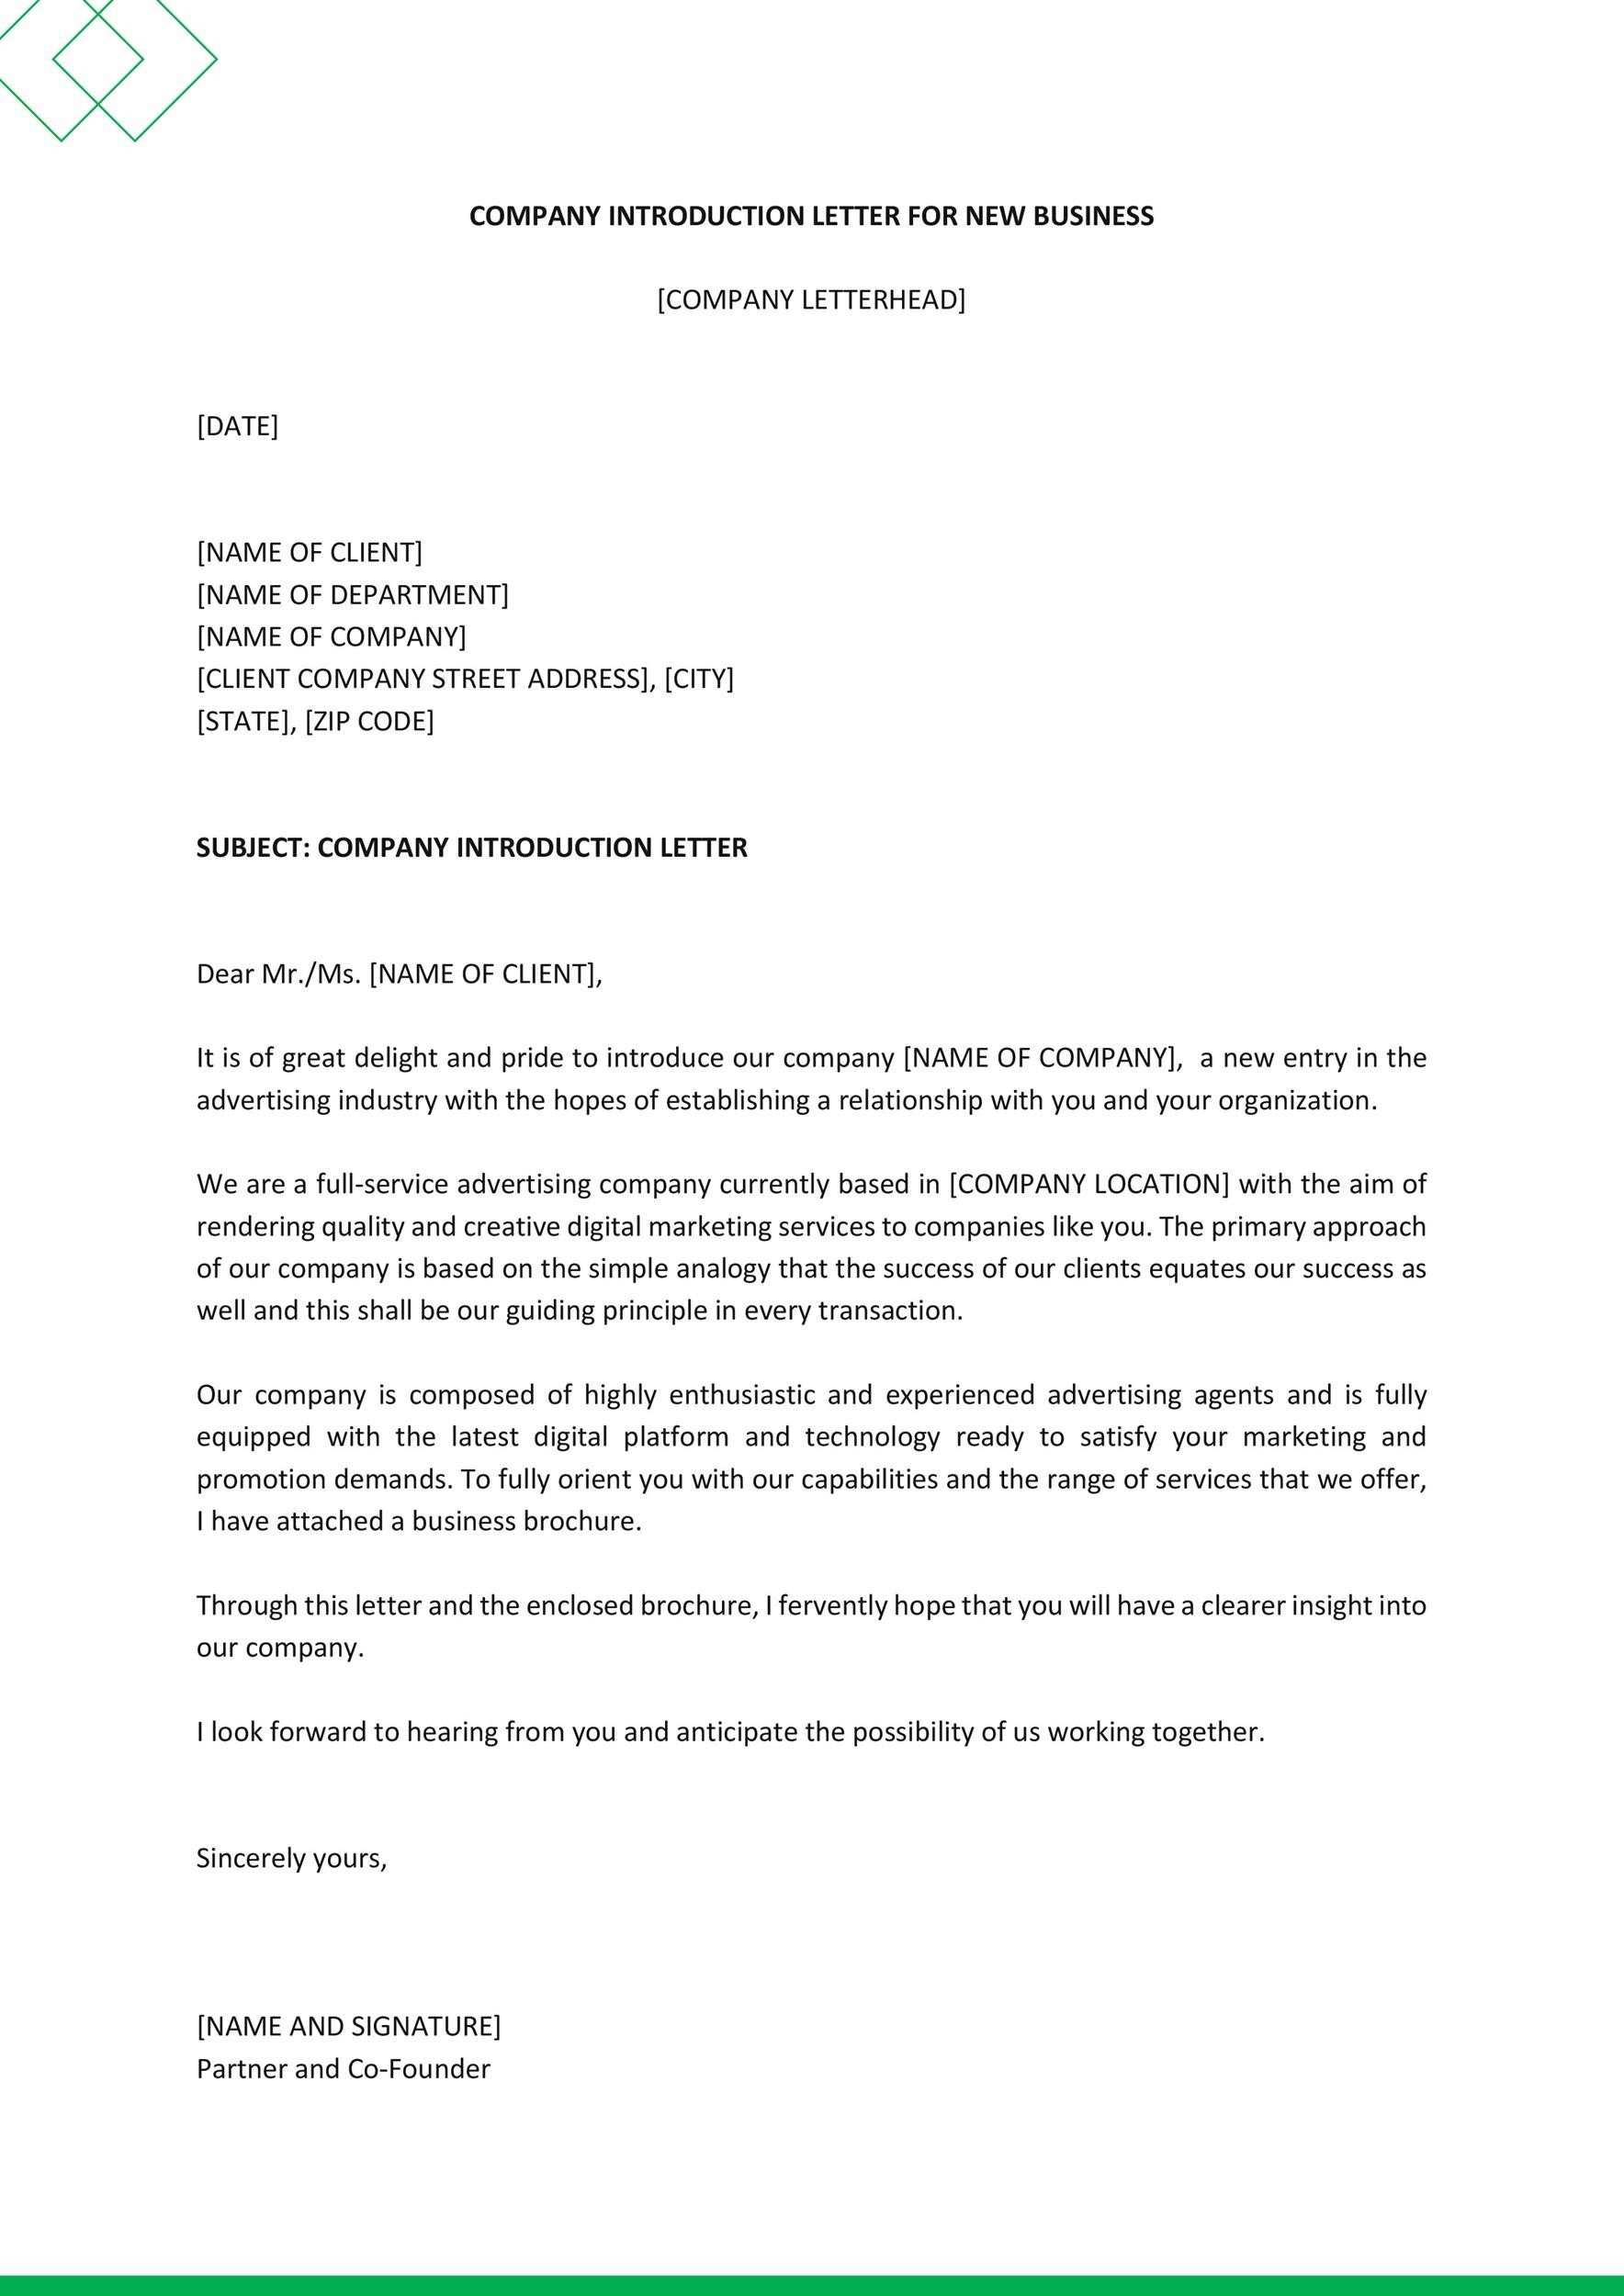 Free business introduction letter 20